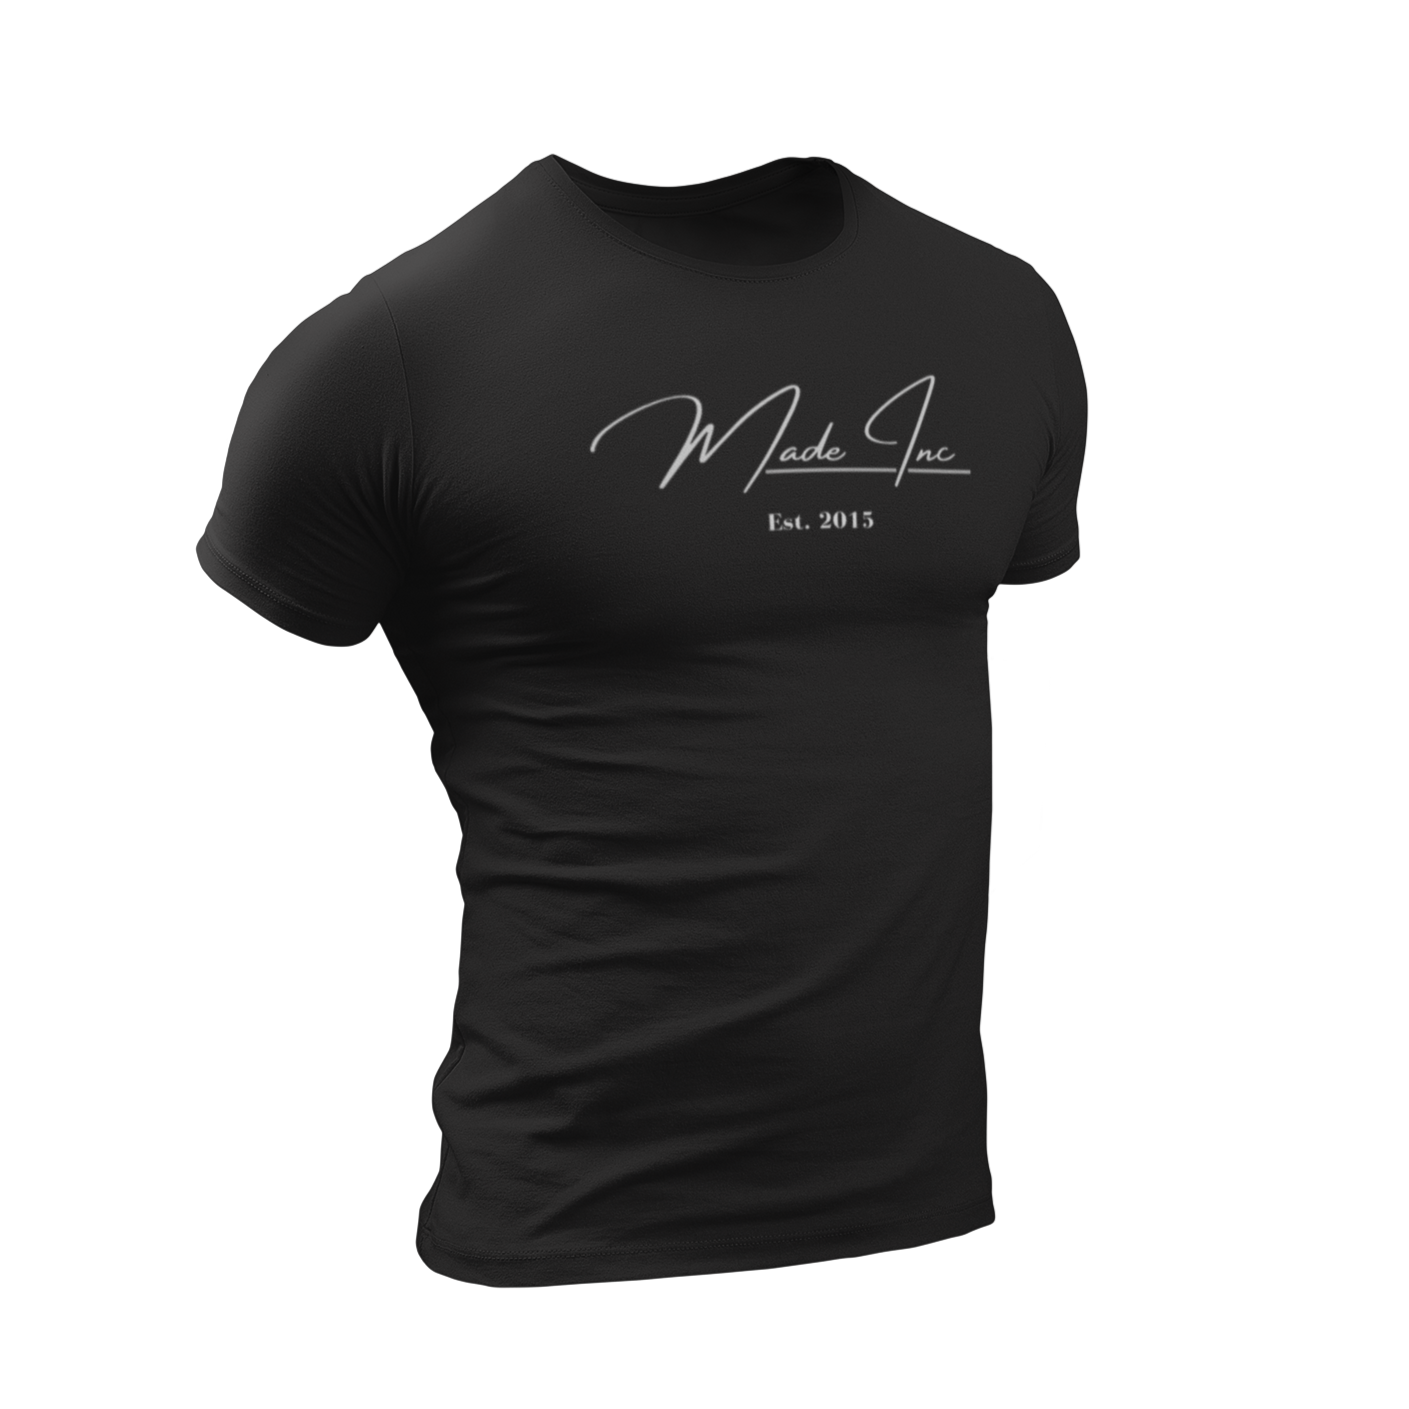 White Sueded Made Inc Signature t-shirt with black print by Made Inc 